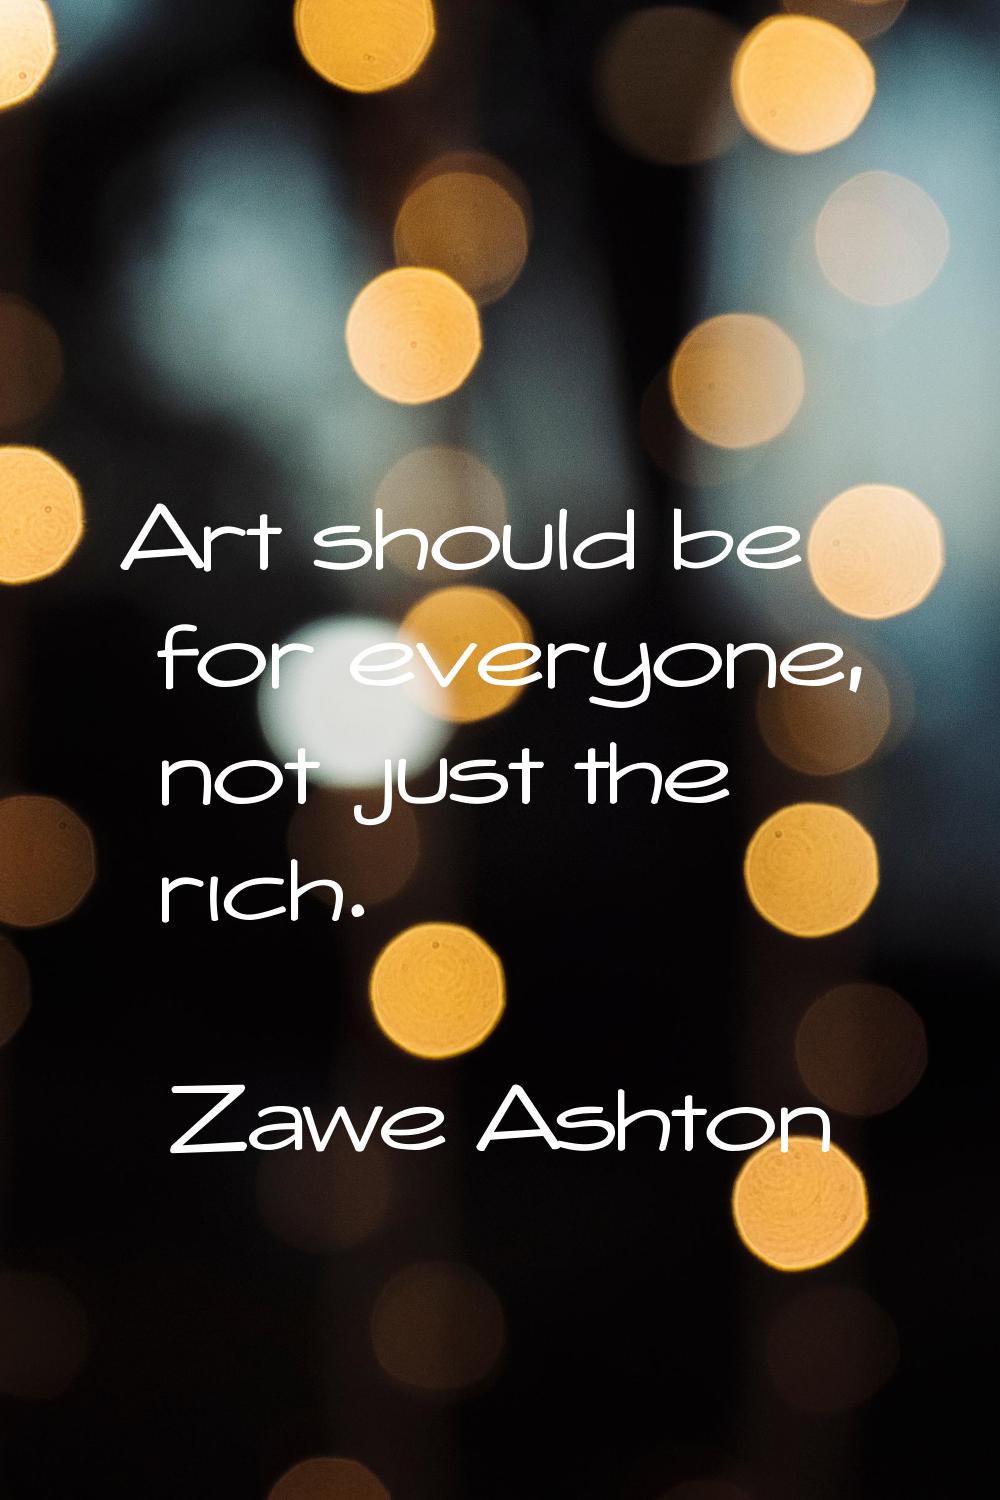 Art should be for everyone, not just the rich.